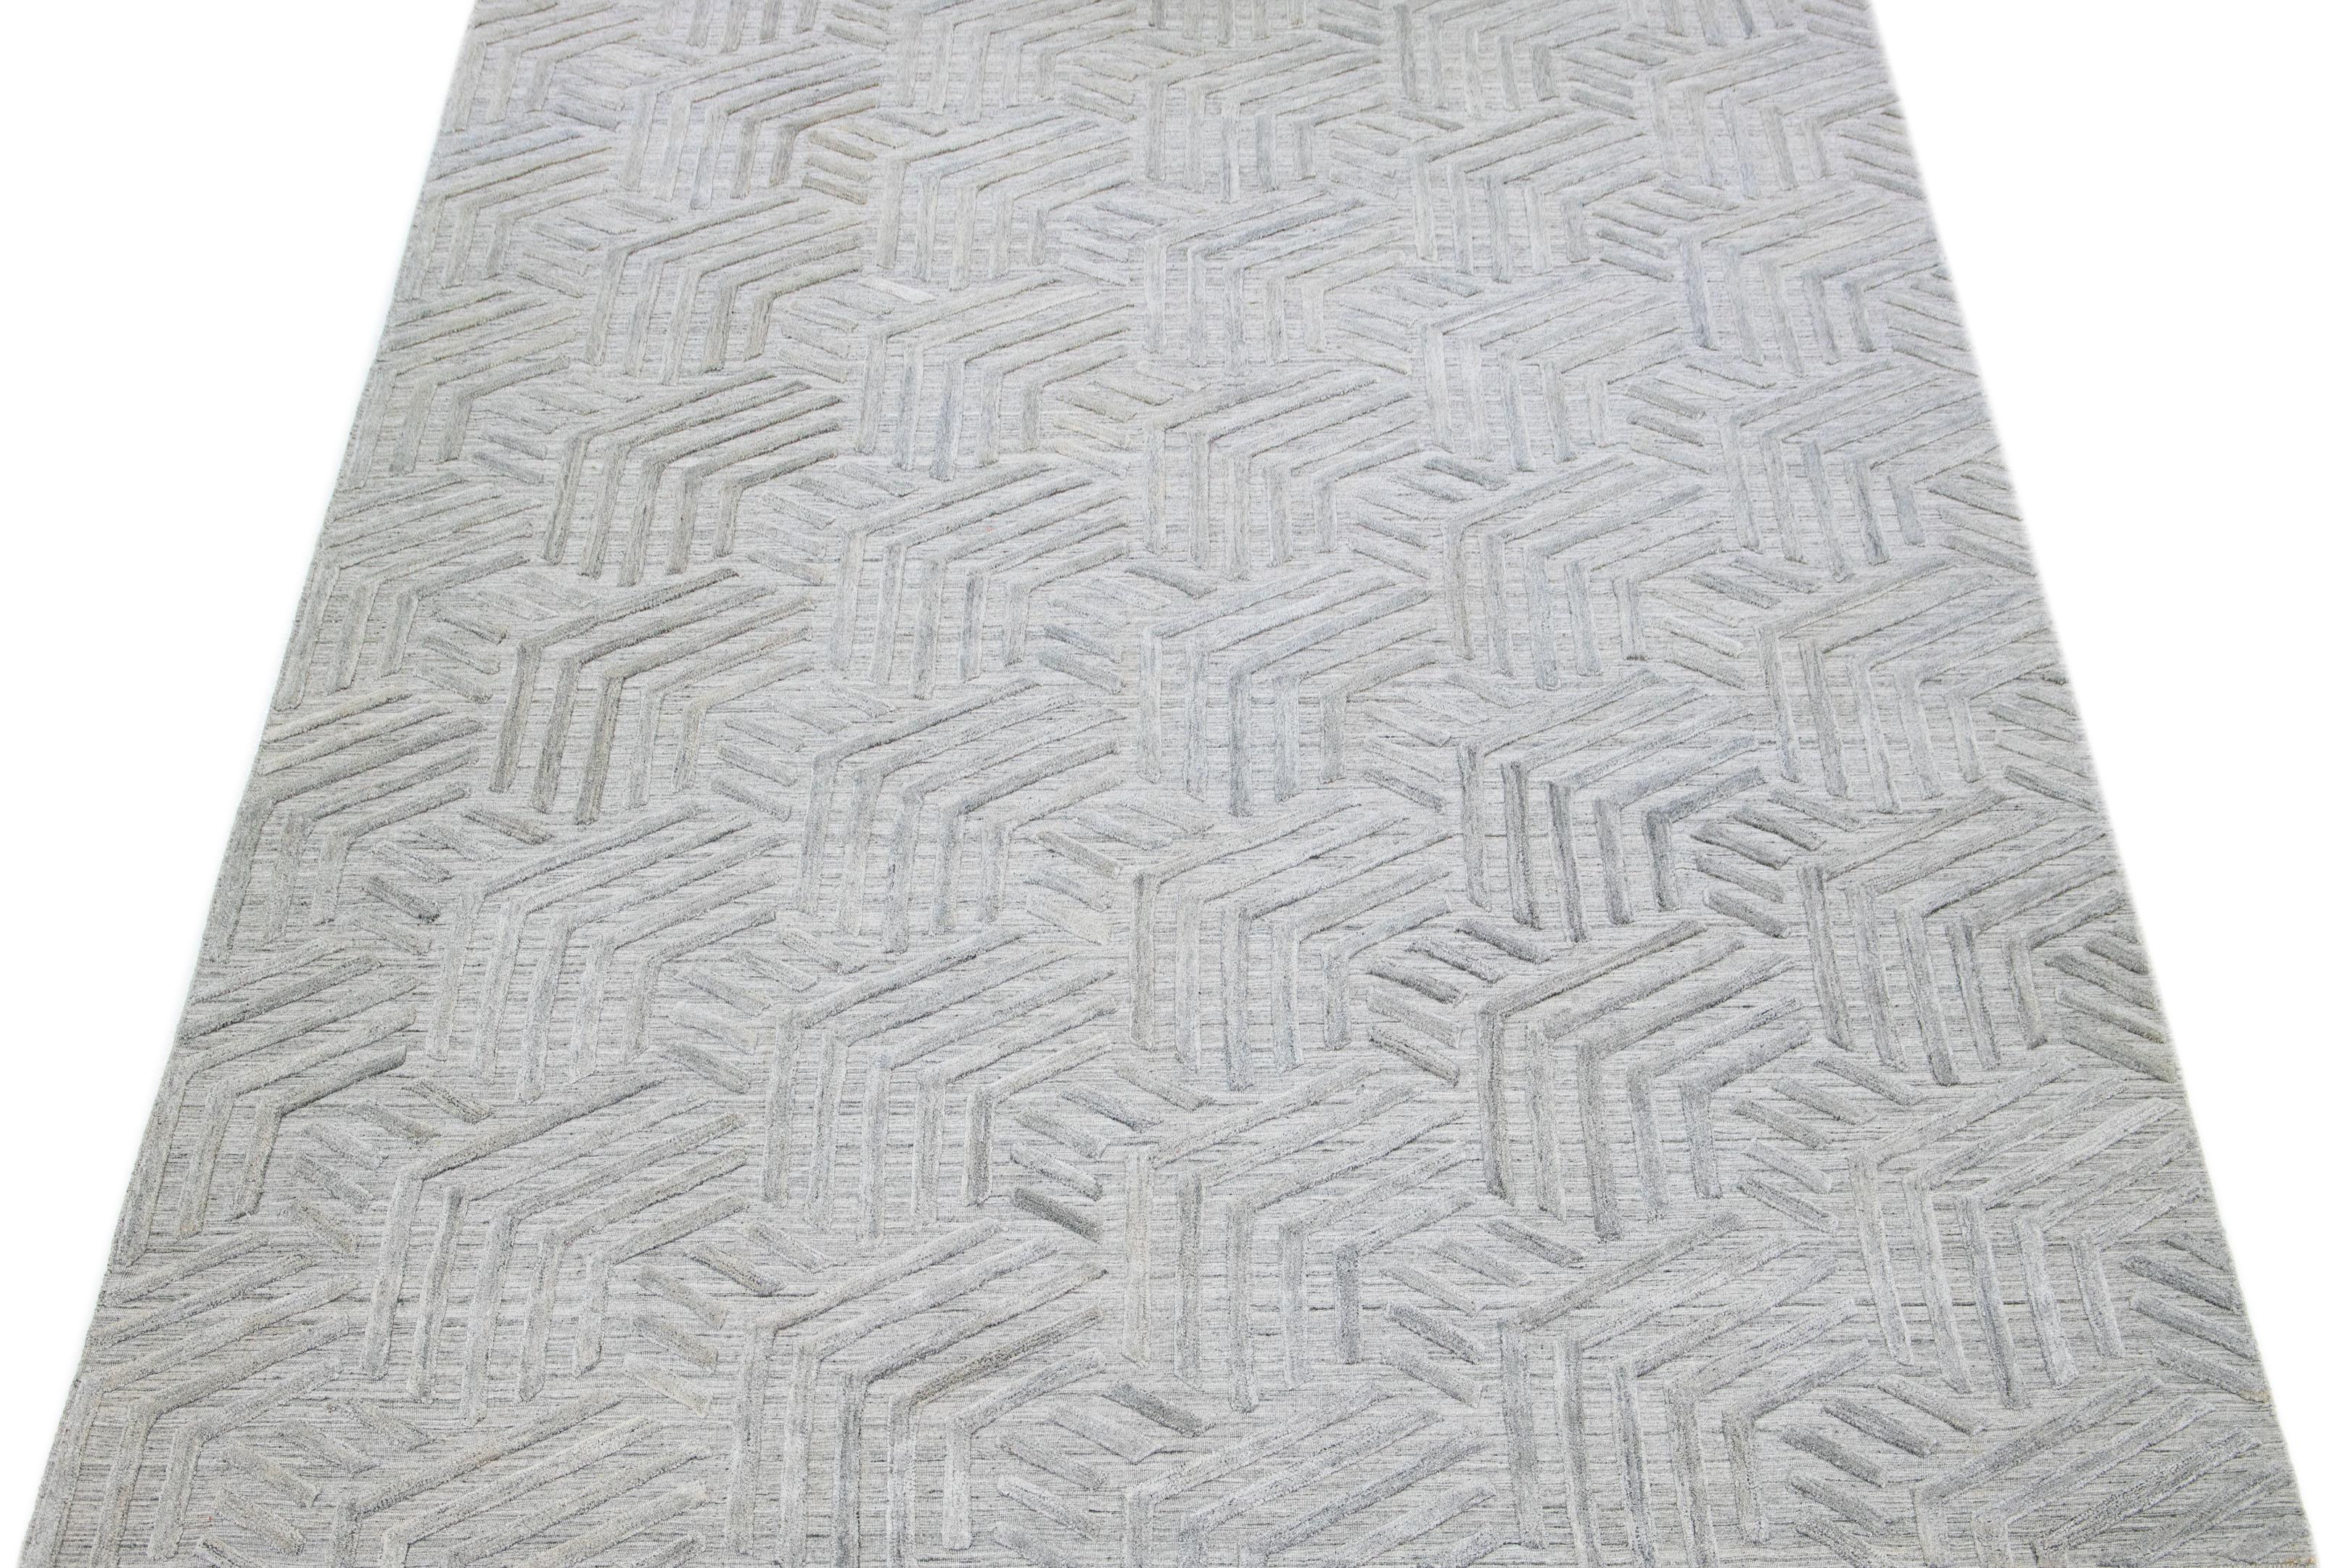 Experience the beauty of a modern Indian transitional flat-weave hand knotted wool rug with a sophisticated grey field. Adding to its elegant charm is the textured and graceful ivory geometric pattern, which runs throughout the entire rug.

This